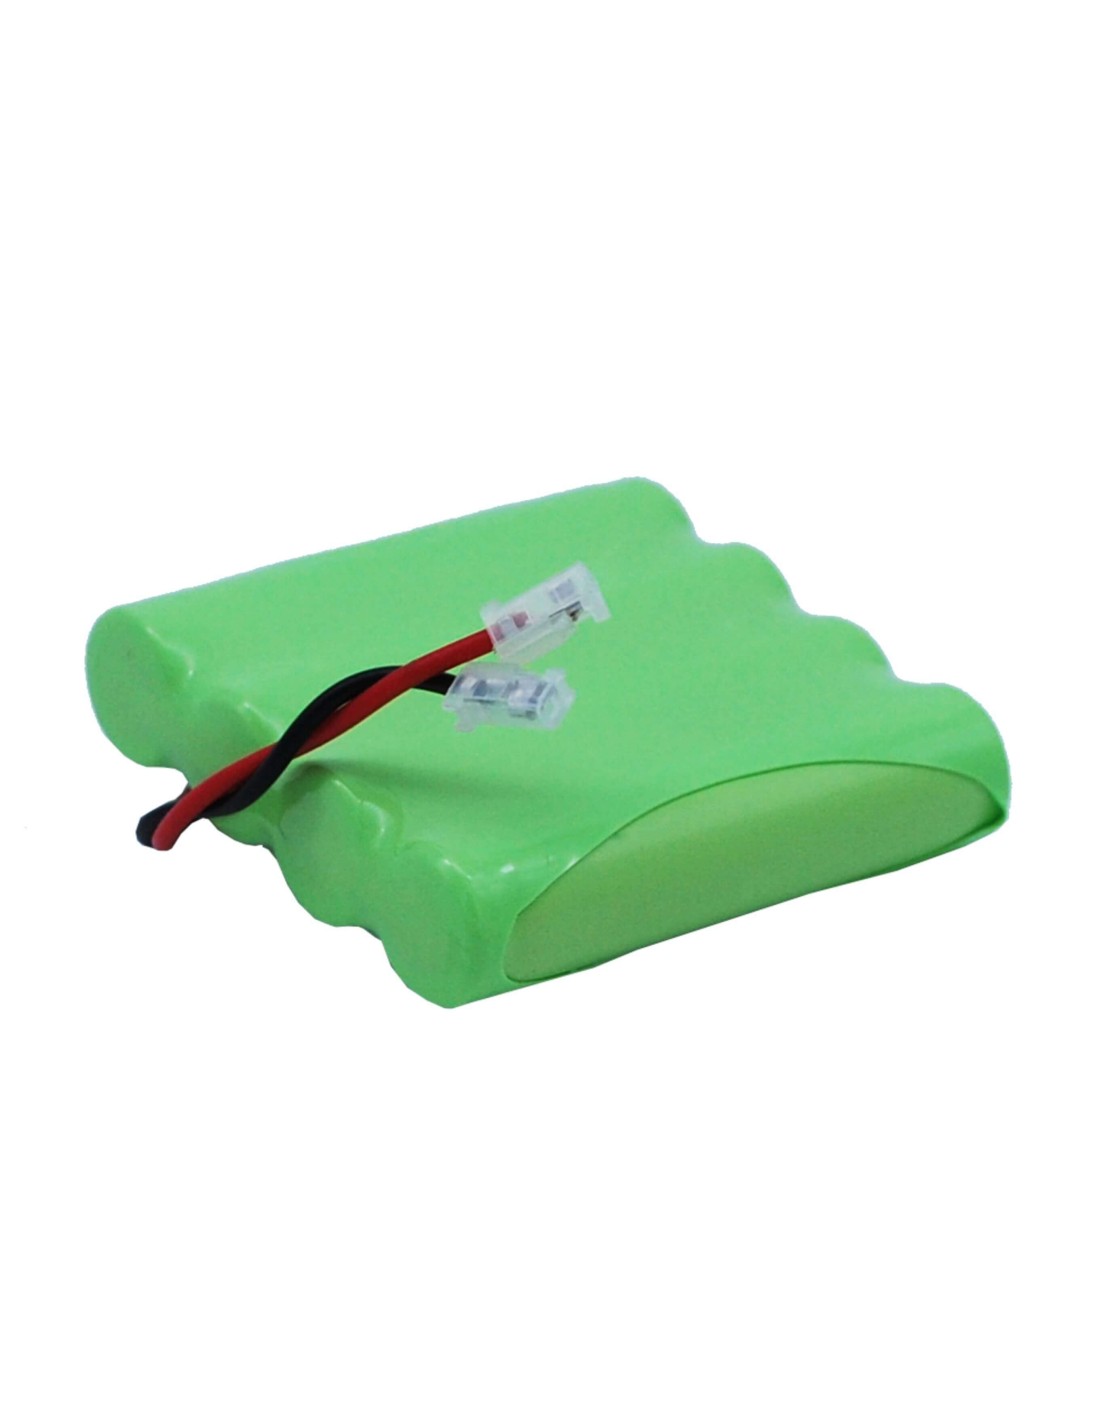 Battery for Universel, Aaa X 4 4.8V, 700mAh - 3.36Wh